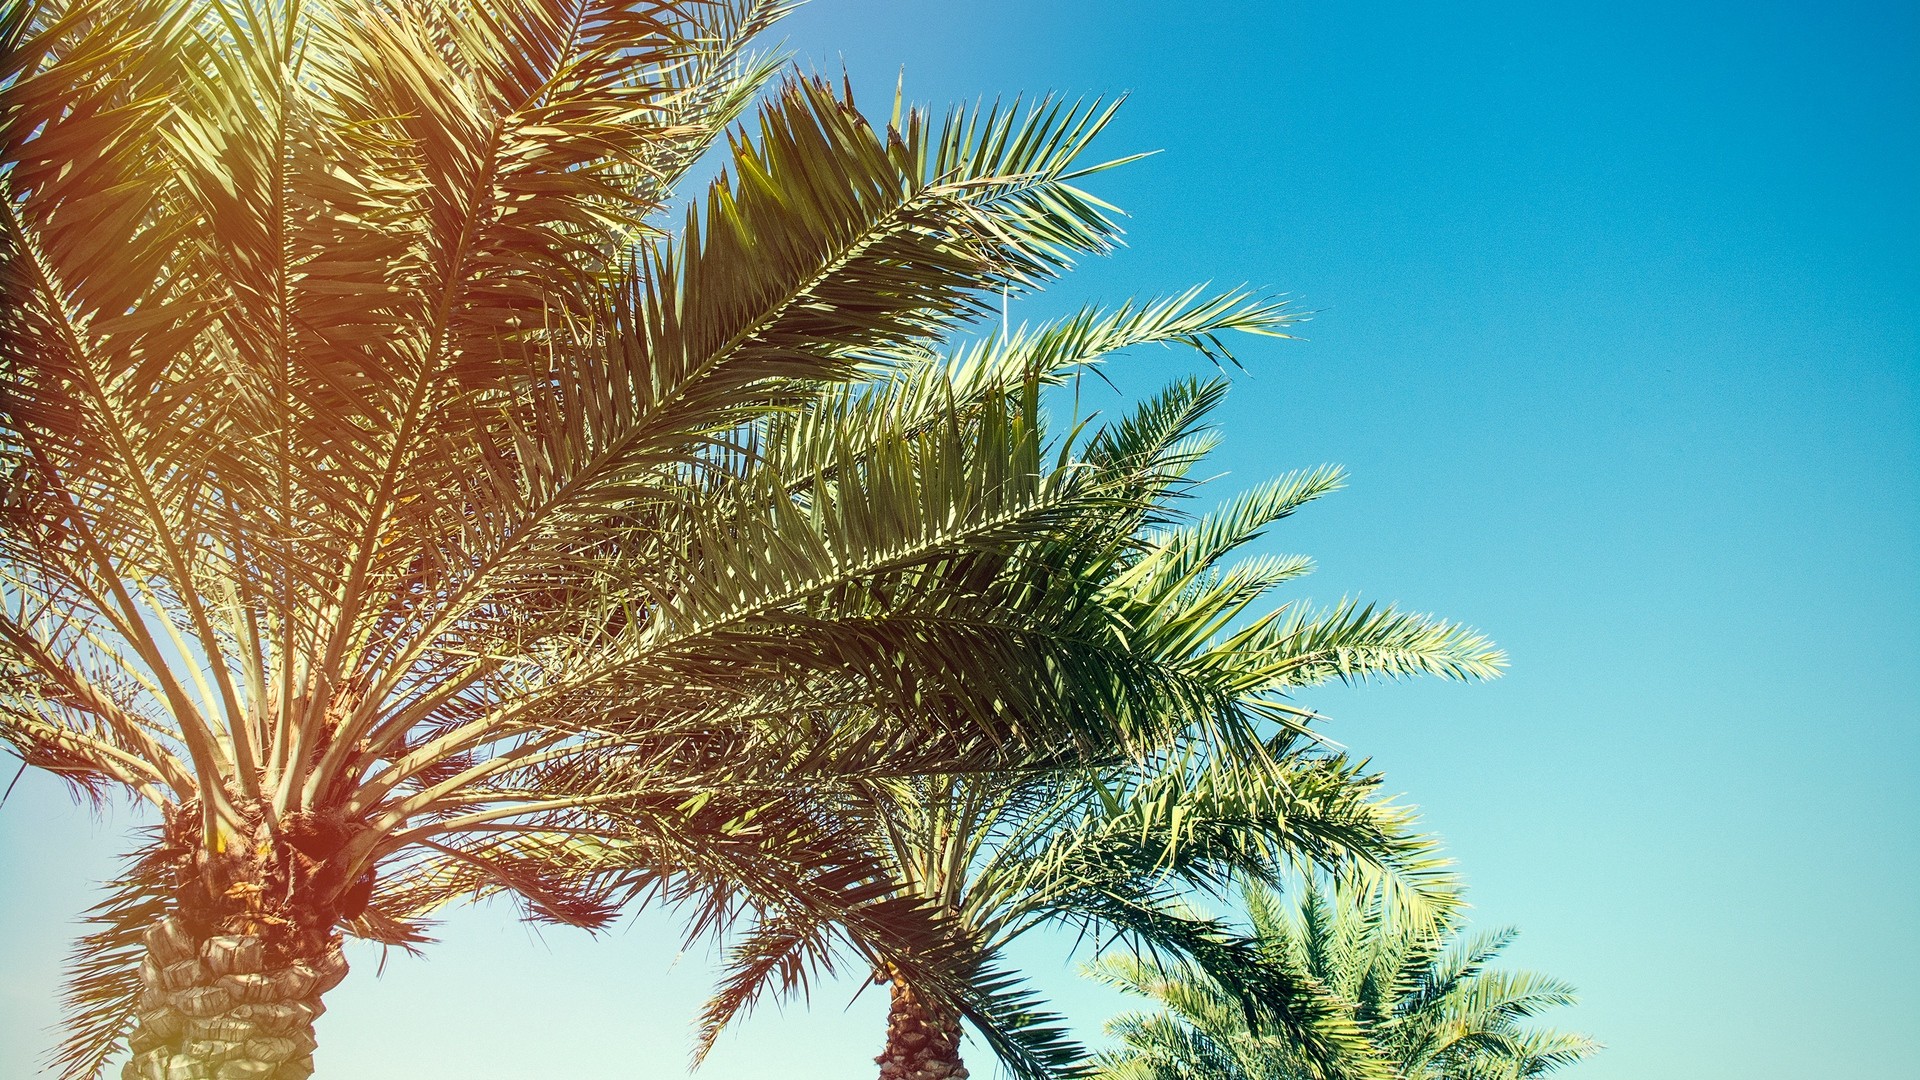 1920x1080 wallpapers: palm trees, trees, branches, sunlight (image)